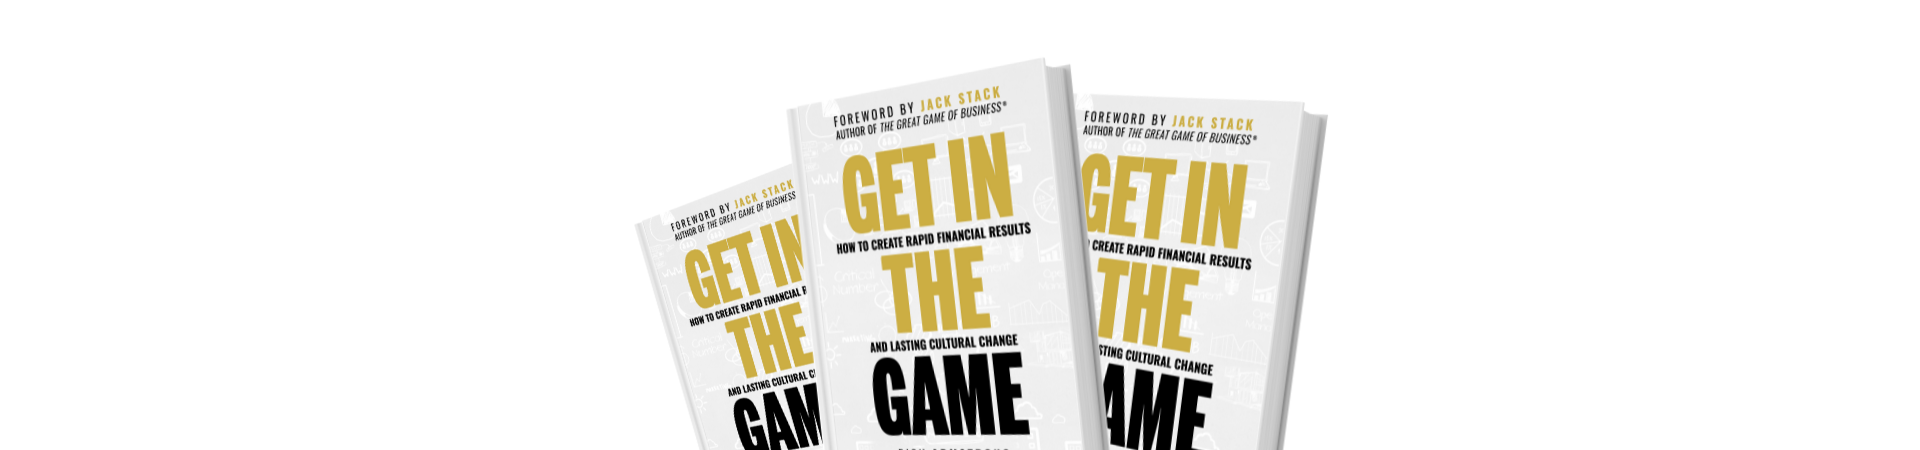 Get in the Game books-no background